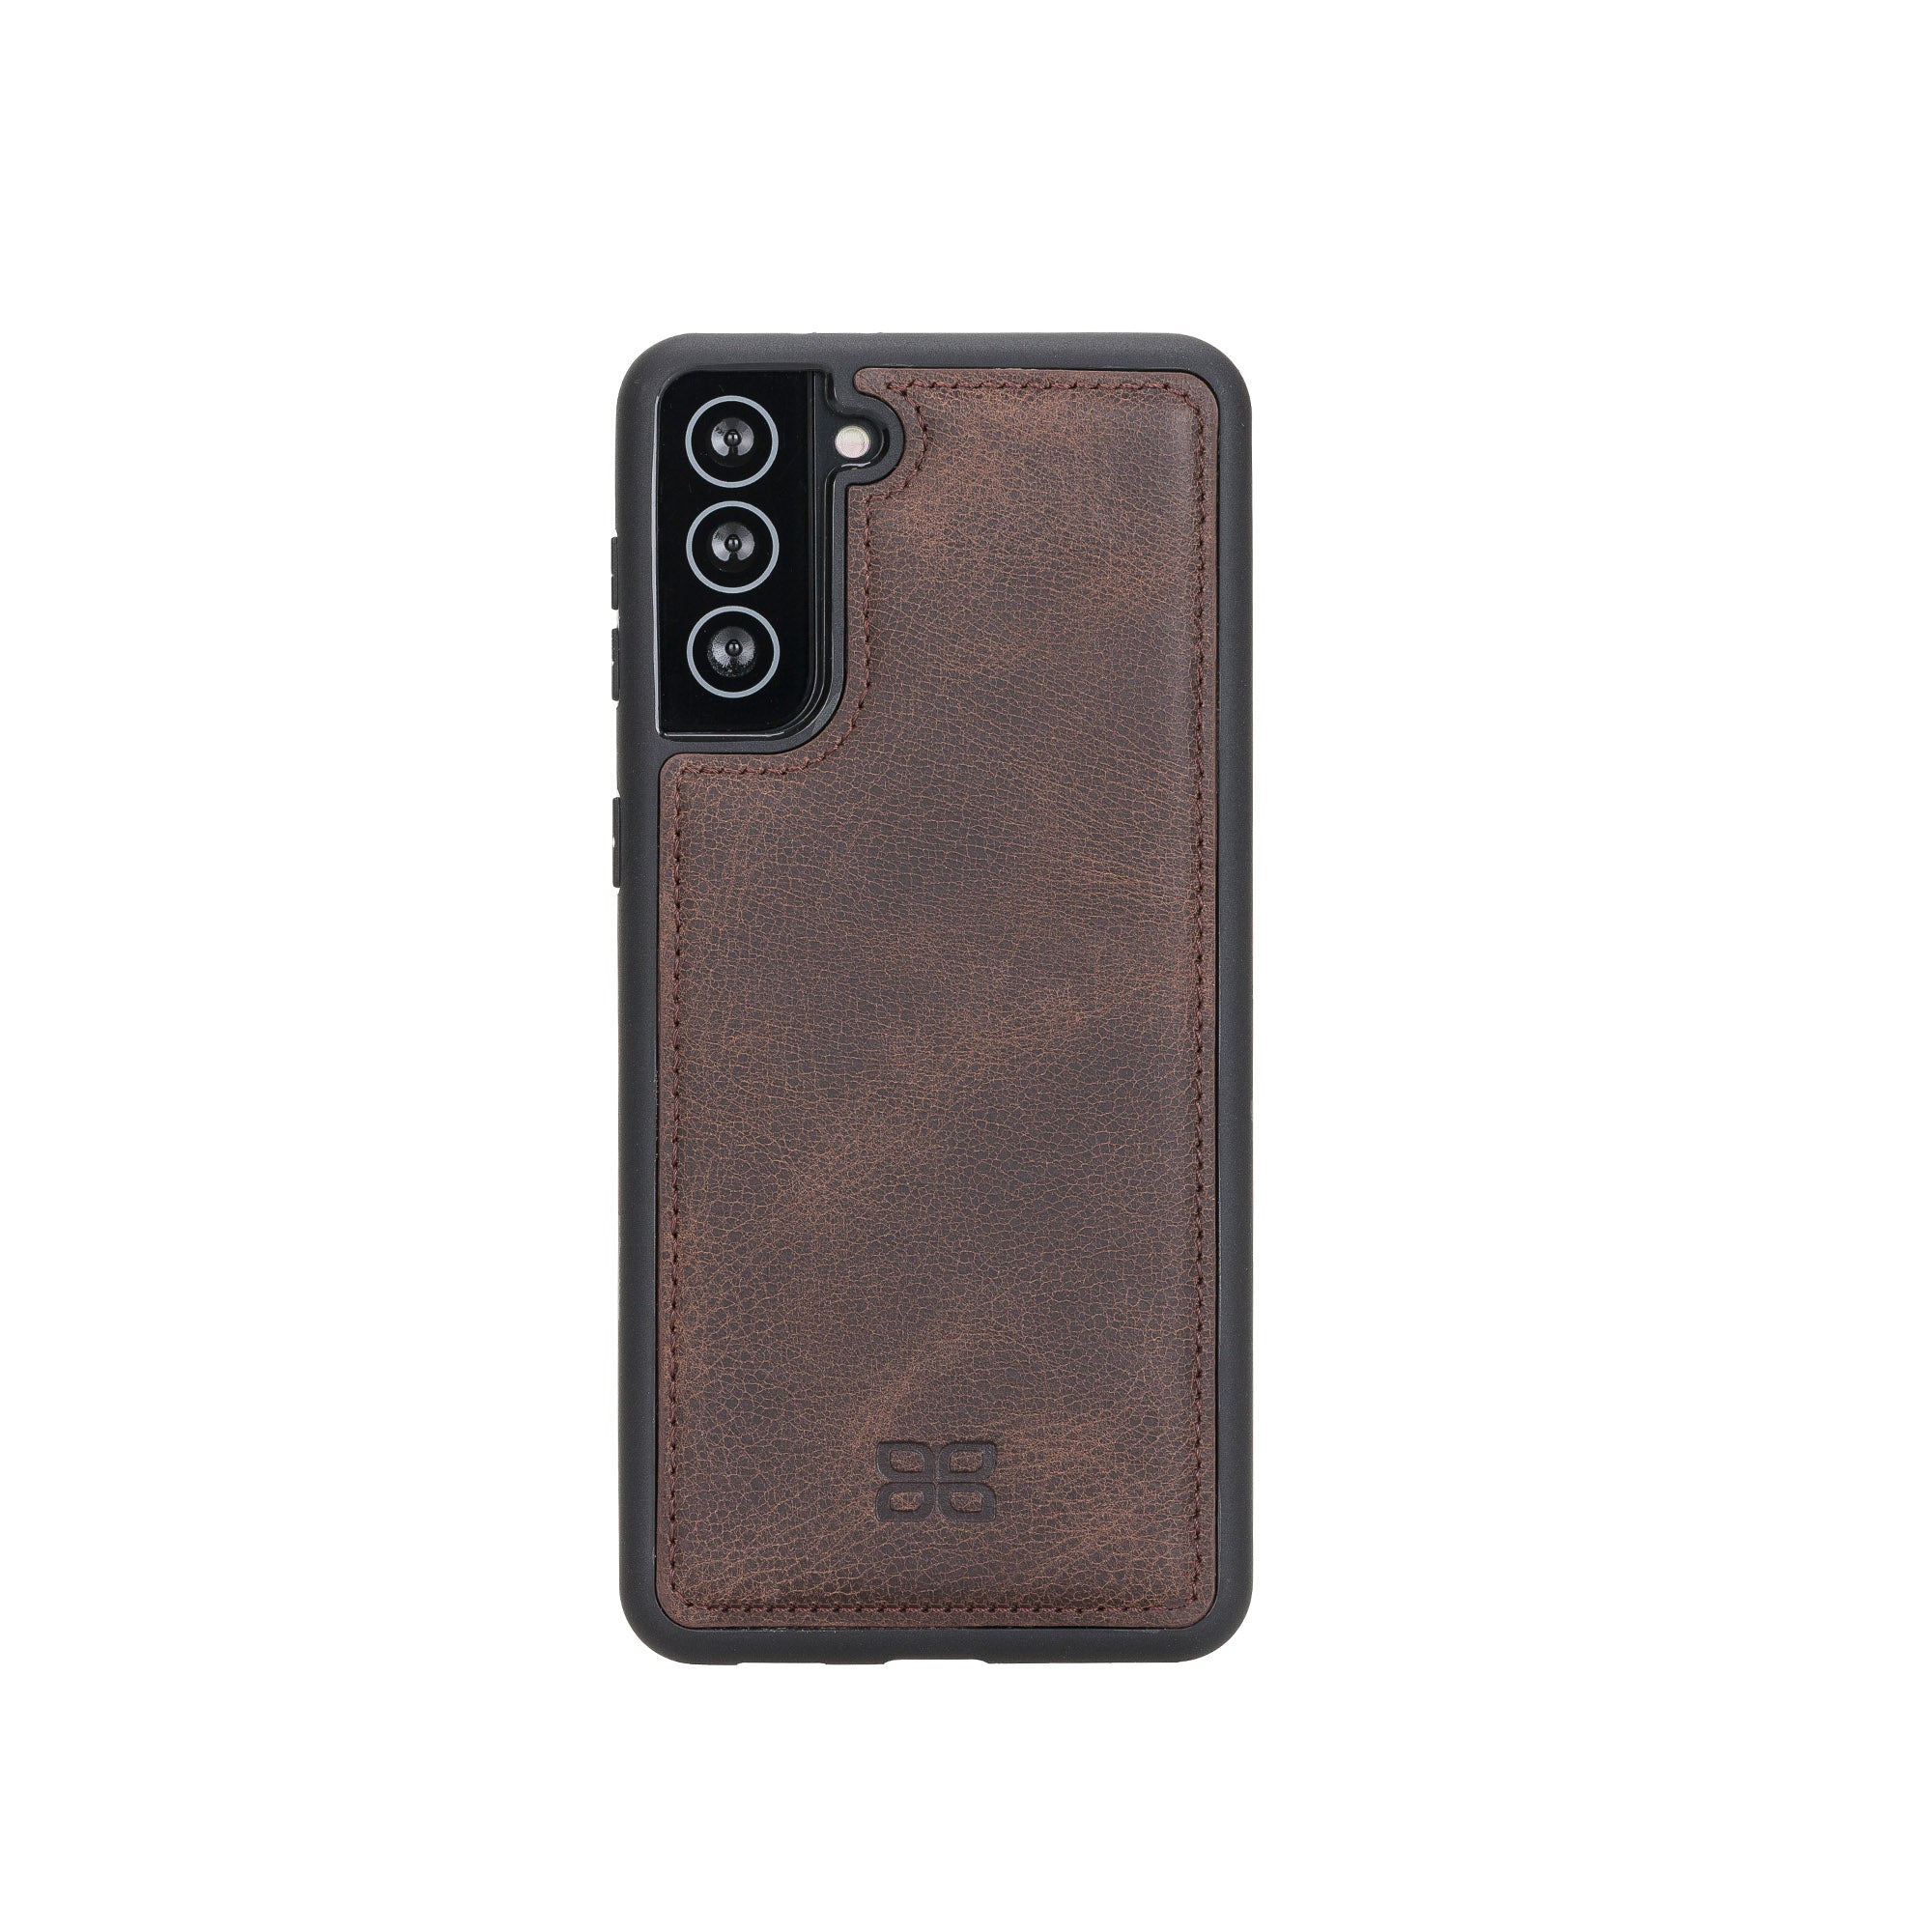 Flex Cover Leather Back Case for Samsung Galaxy S21 Plus 5G (6.7") - BROWN - saracleather